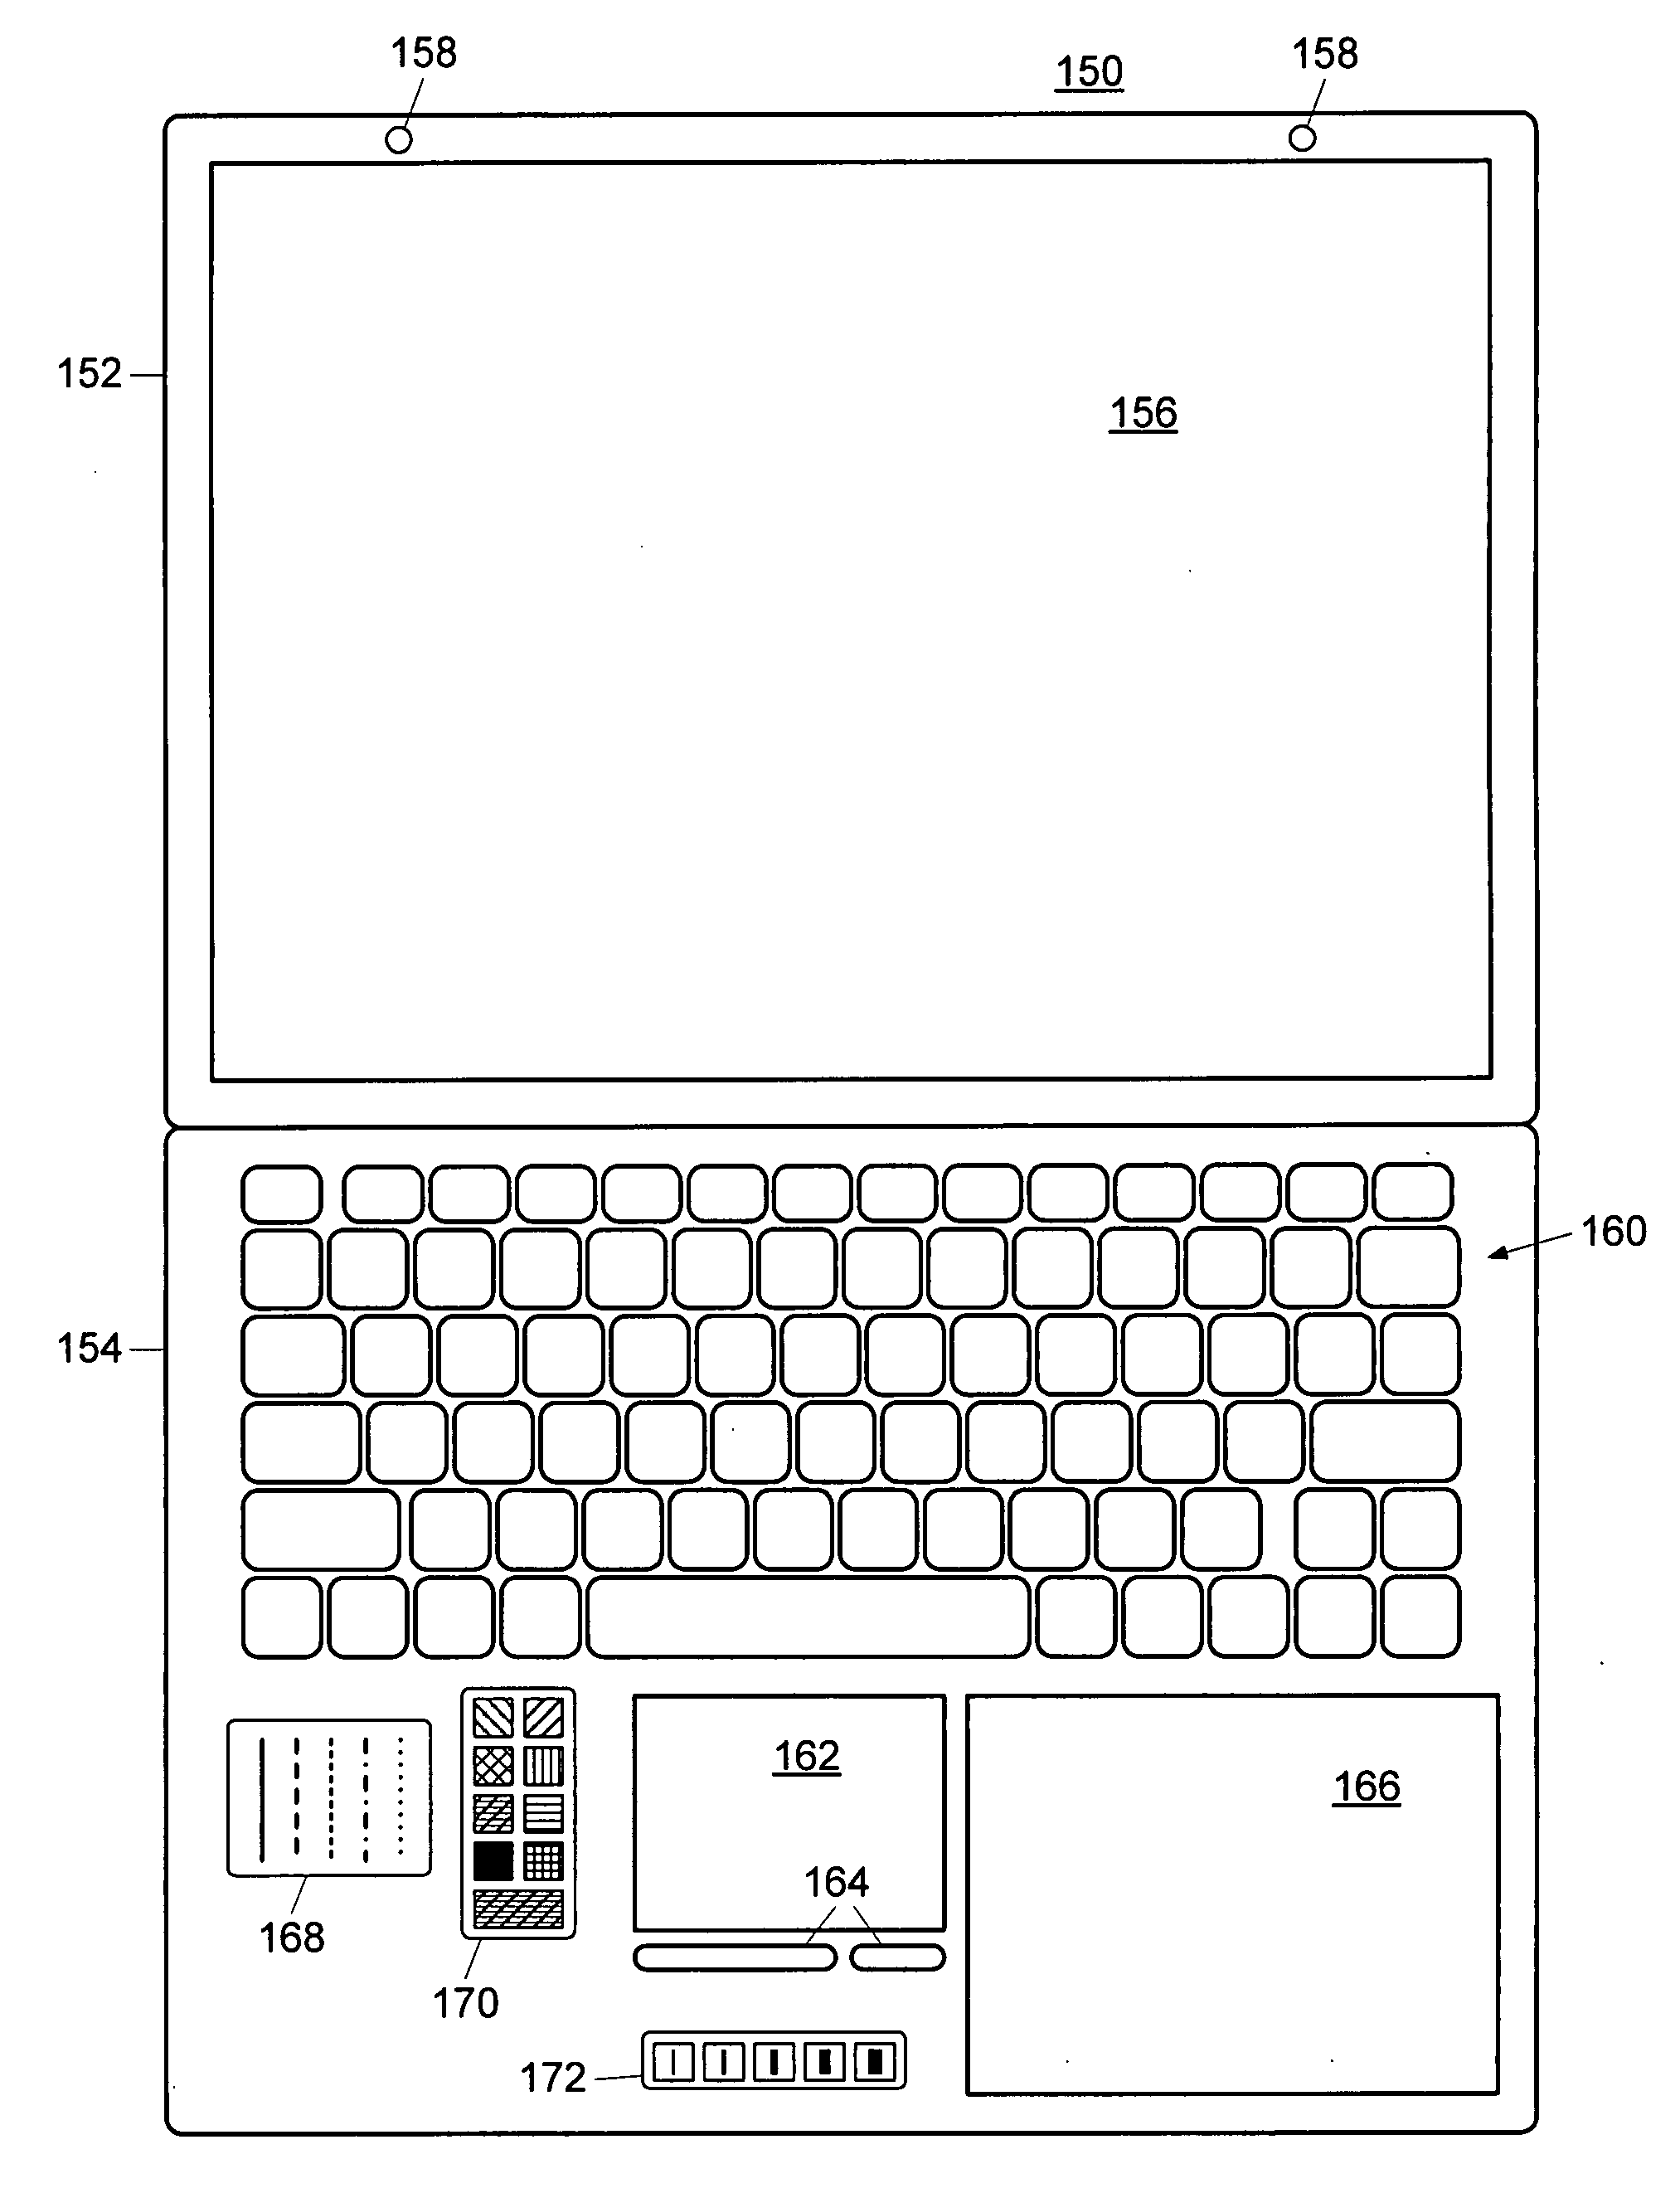 Relative-position, absolute-orientation sketch pad and optical stylus for a personal computer